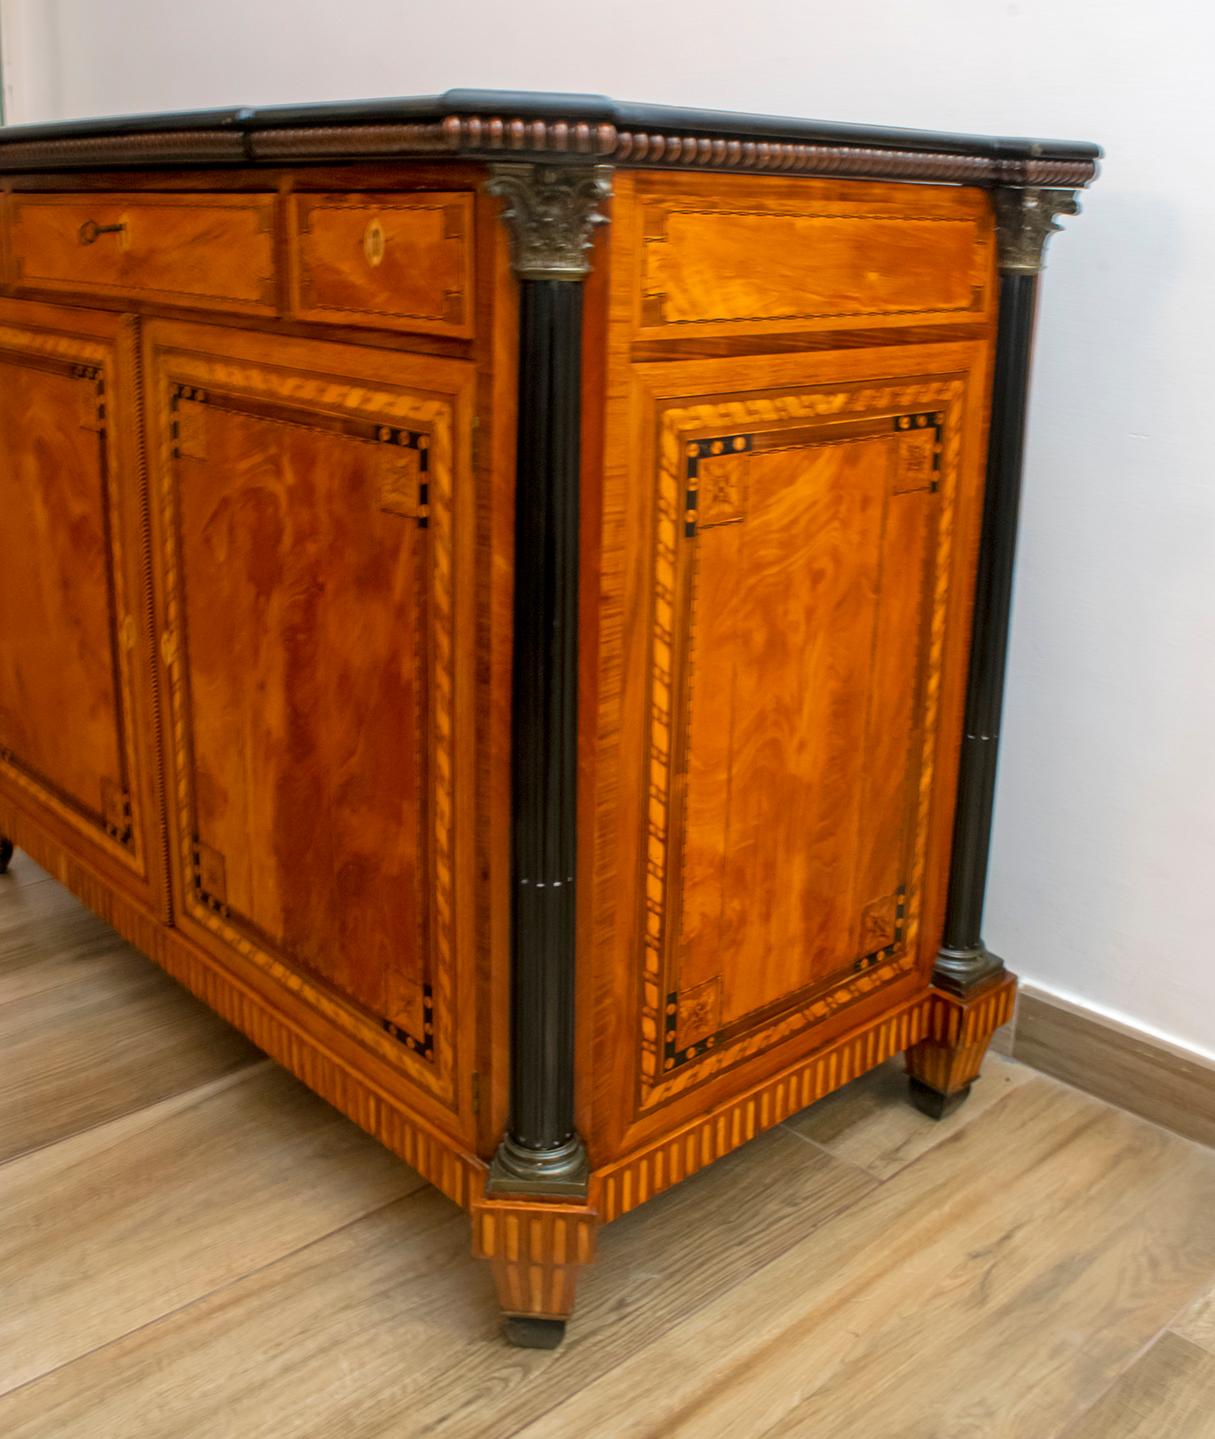 Walnut Napoleon III French Sideboard Inlaid with Geometric Floral Motifs, 1850 For Sale